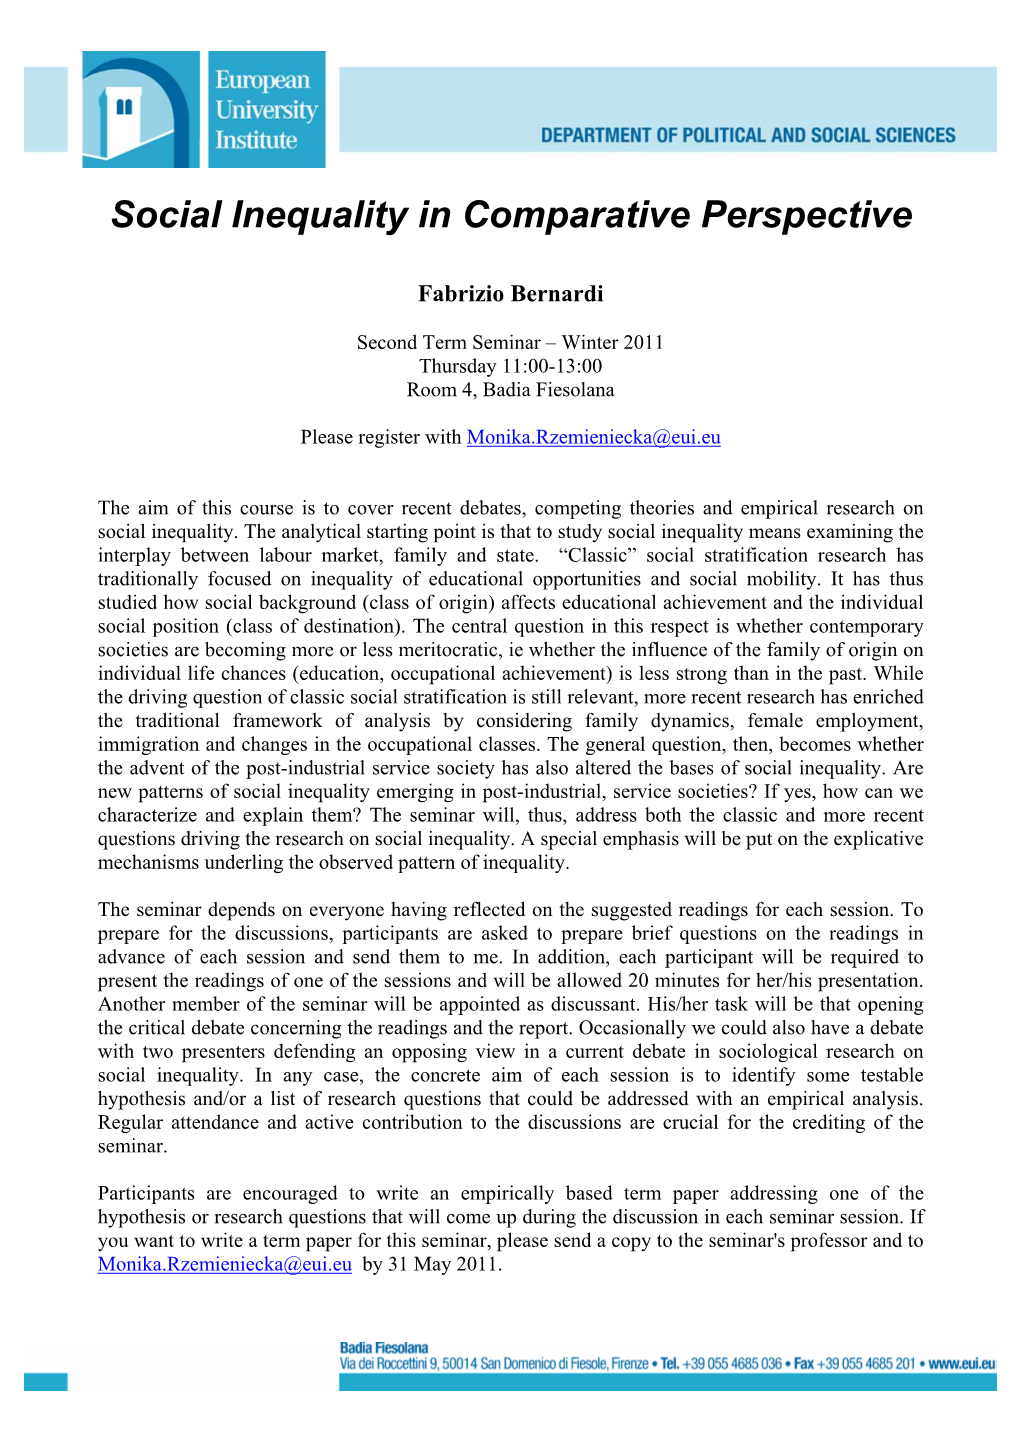 Social Inequality in Comparative Perspective